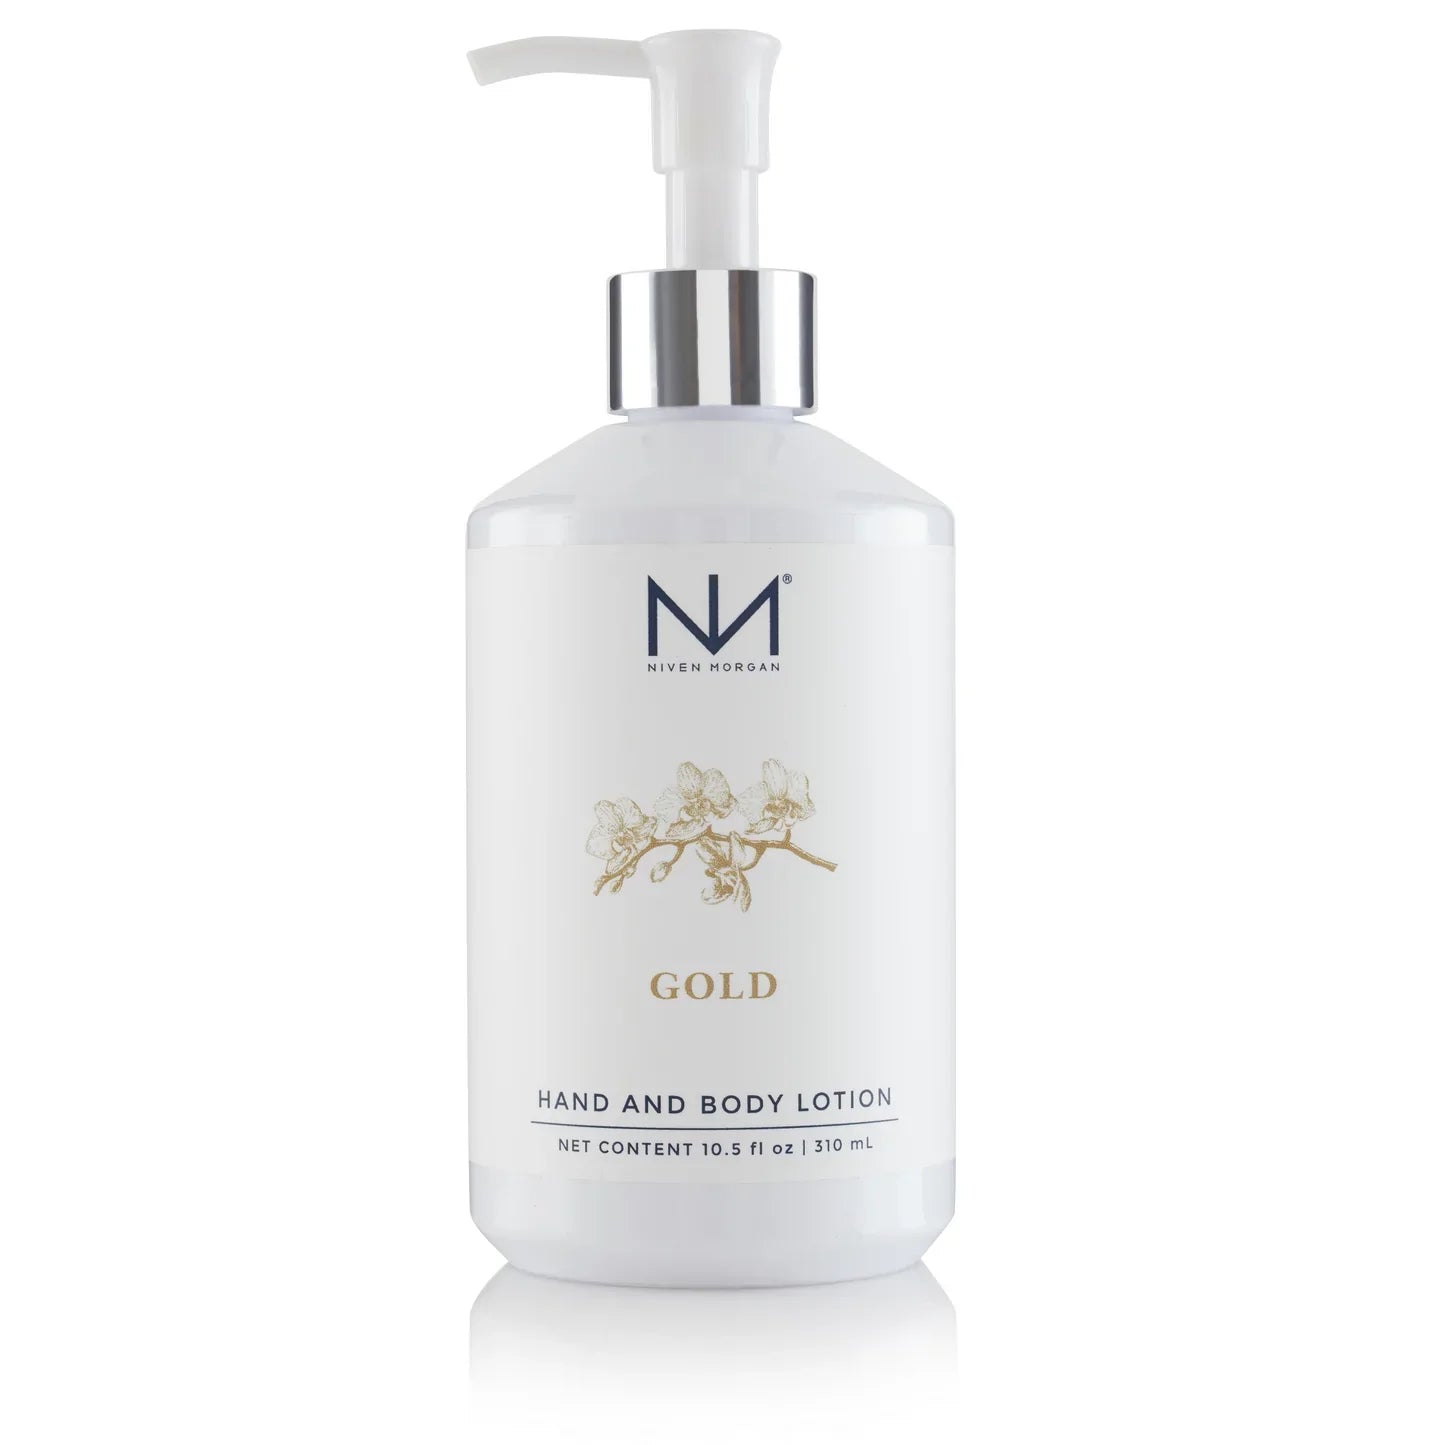 NM Lotion Gold